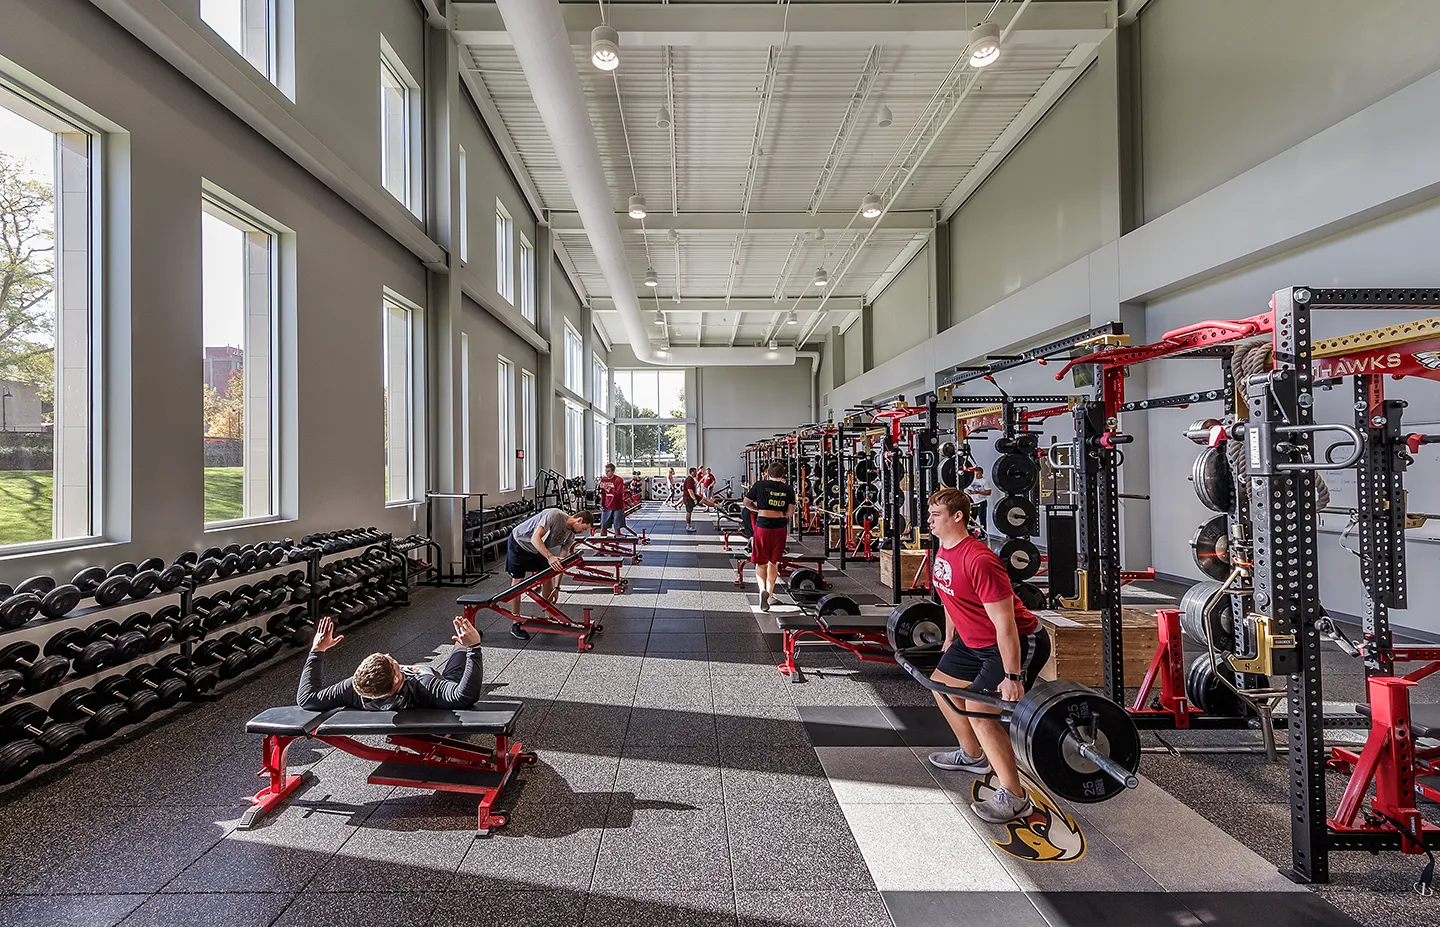 Natural light and volume energize the athletic weight room.